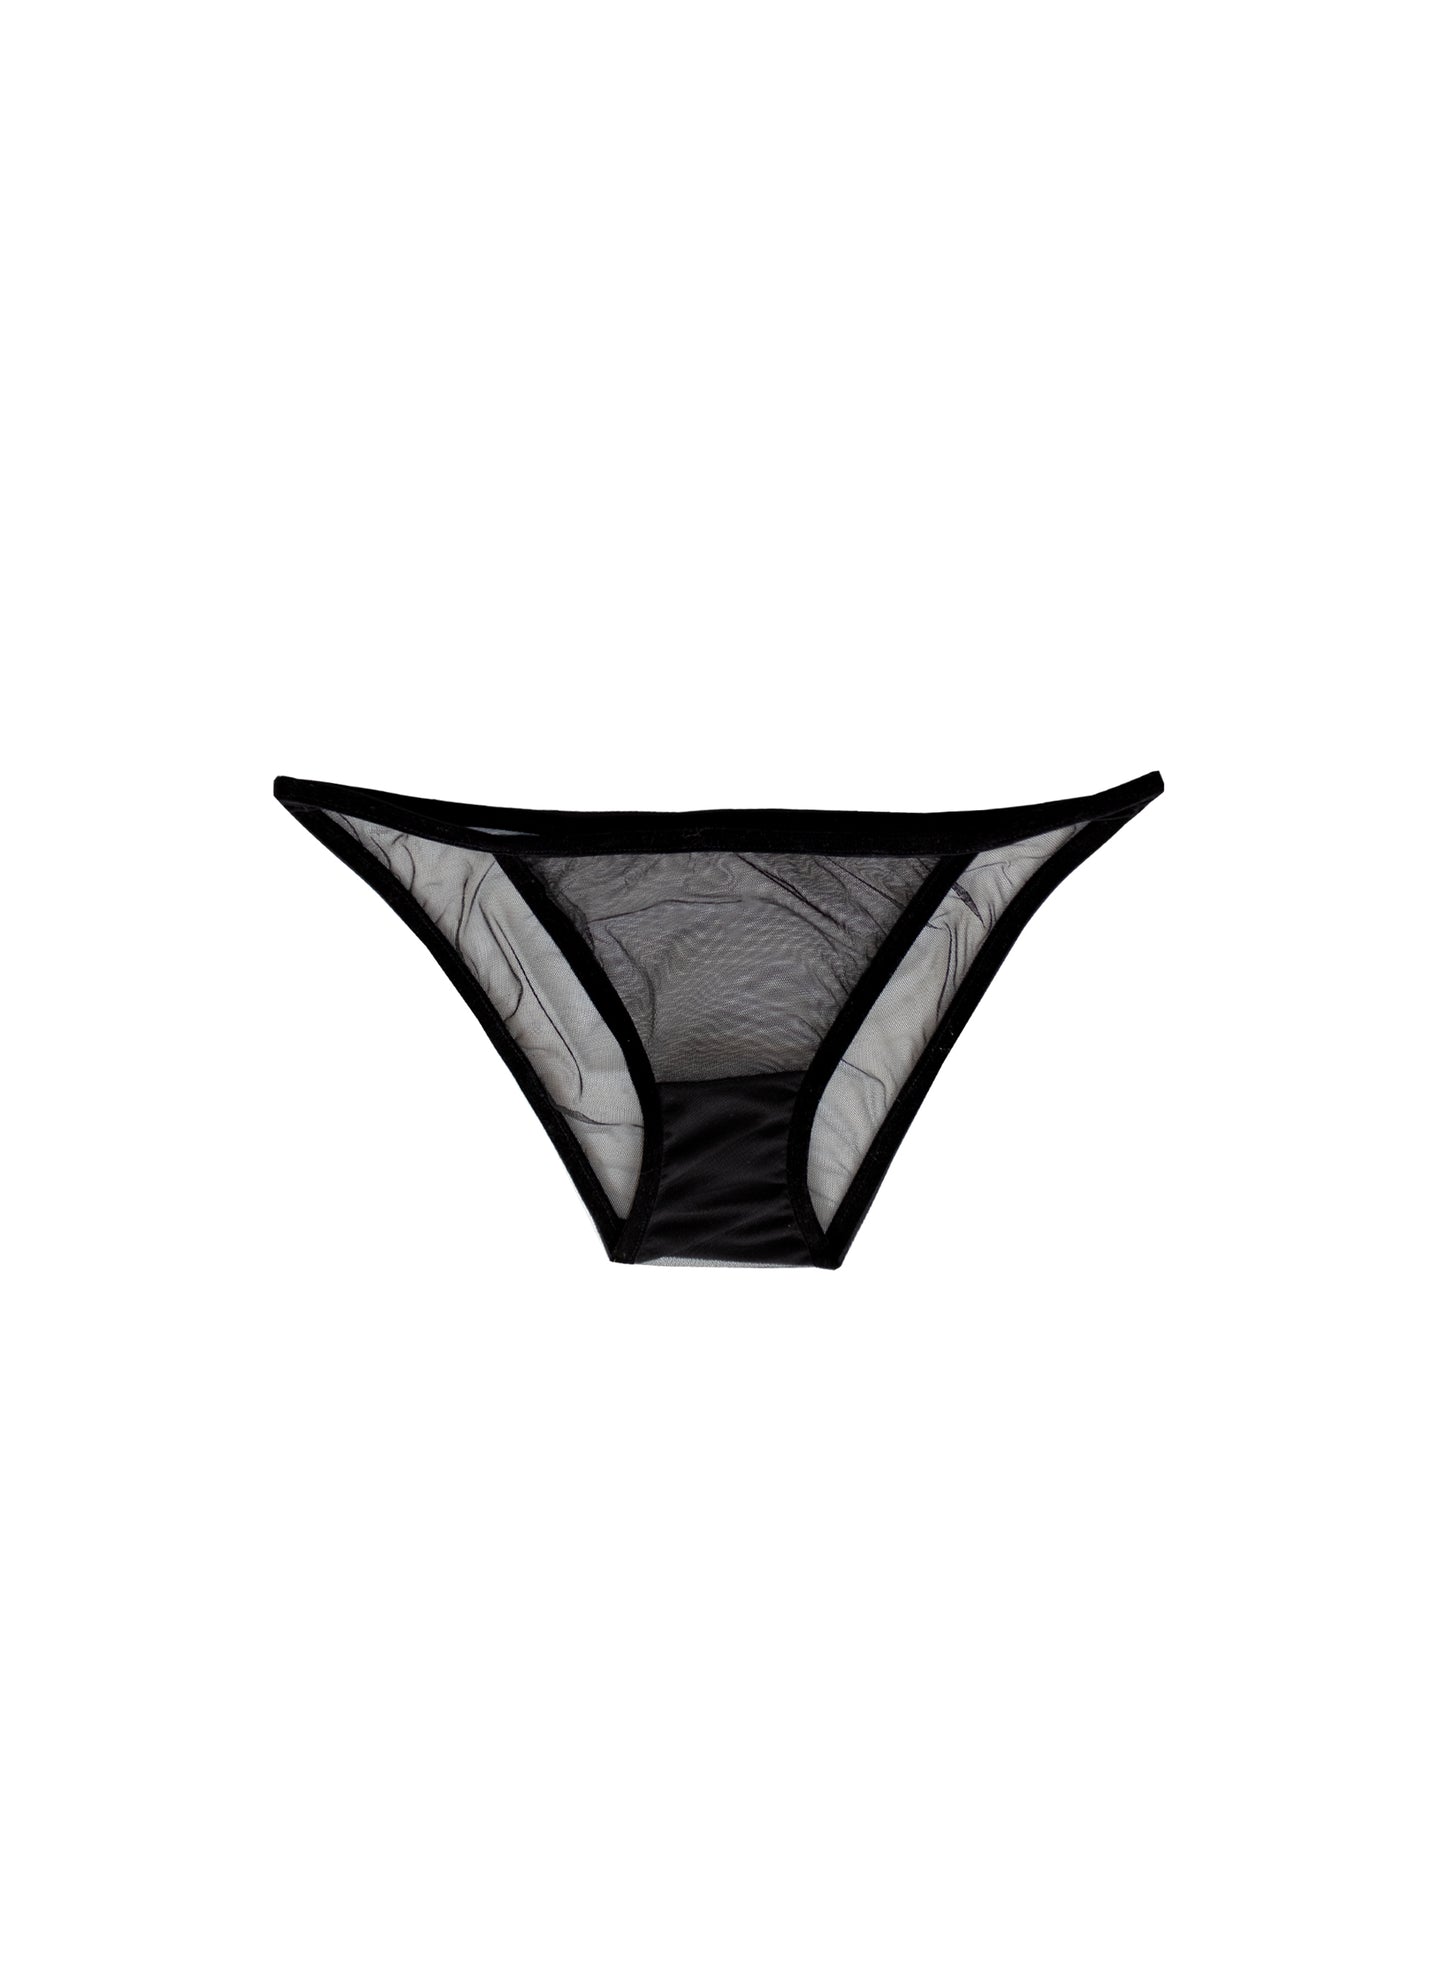 The No Crumbs Knicker / Thong